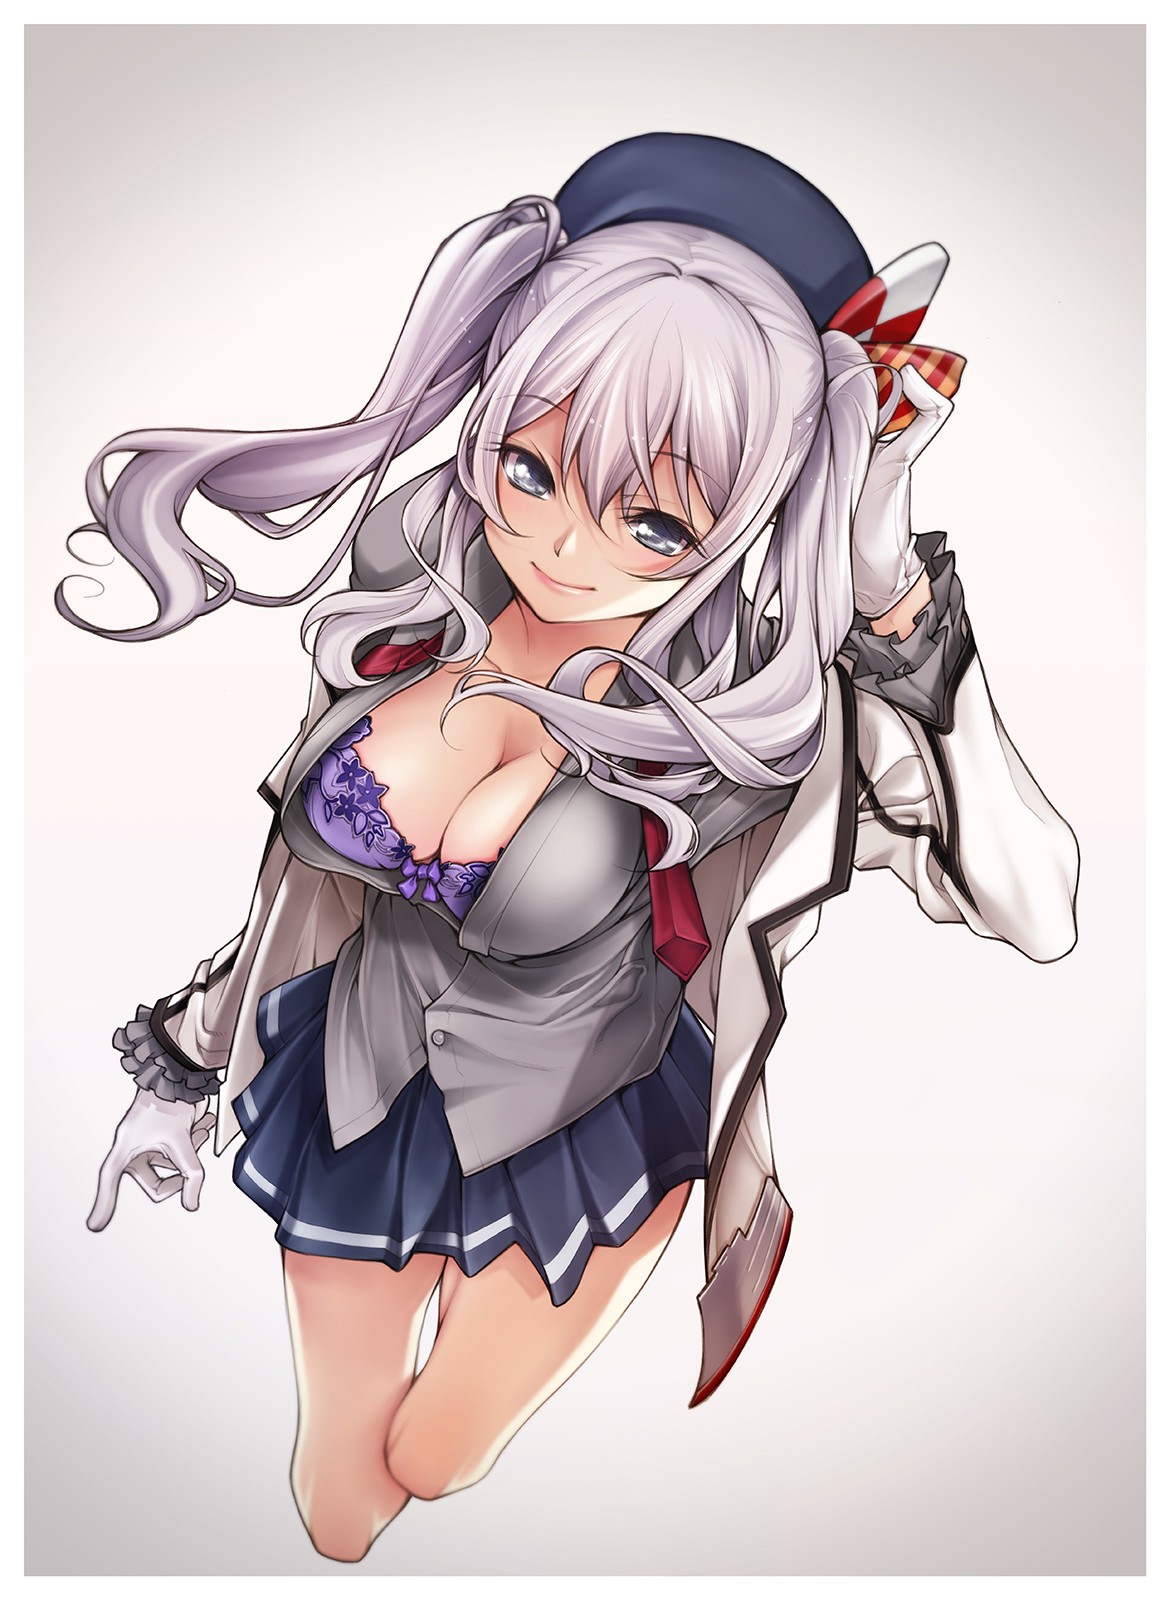 Anime 1170x1600 anime anime girls Kantai Collection Kashima (KanColle) bra cleavage open shirt uniform boobs big boobs simple background skirt purple lingerie lingerie purple bra hat women with hats smiling looking at viewer curvy